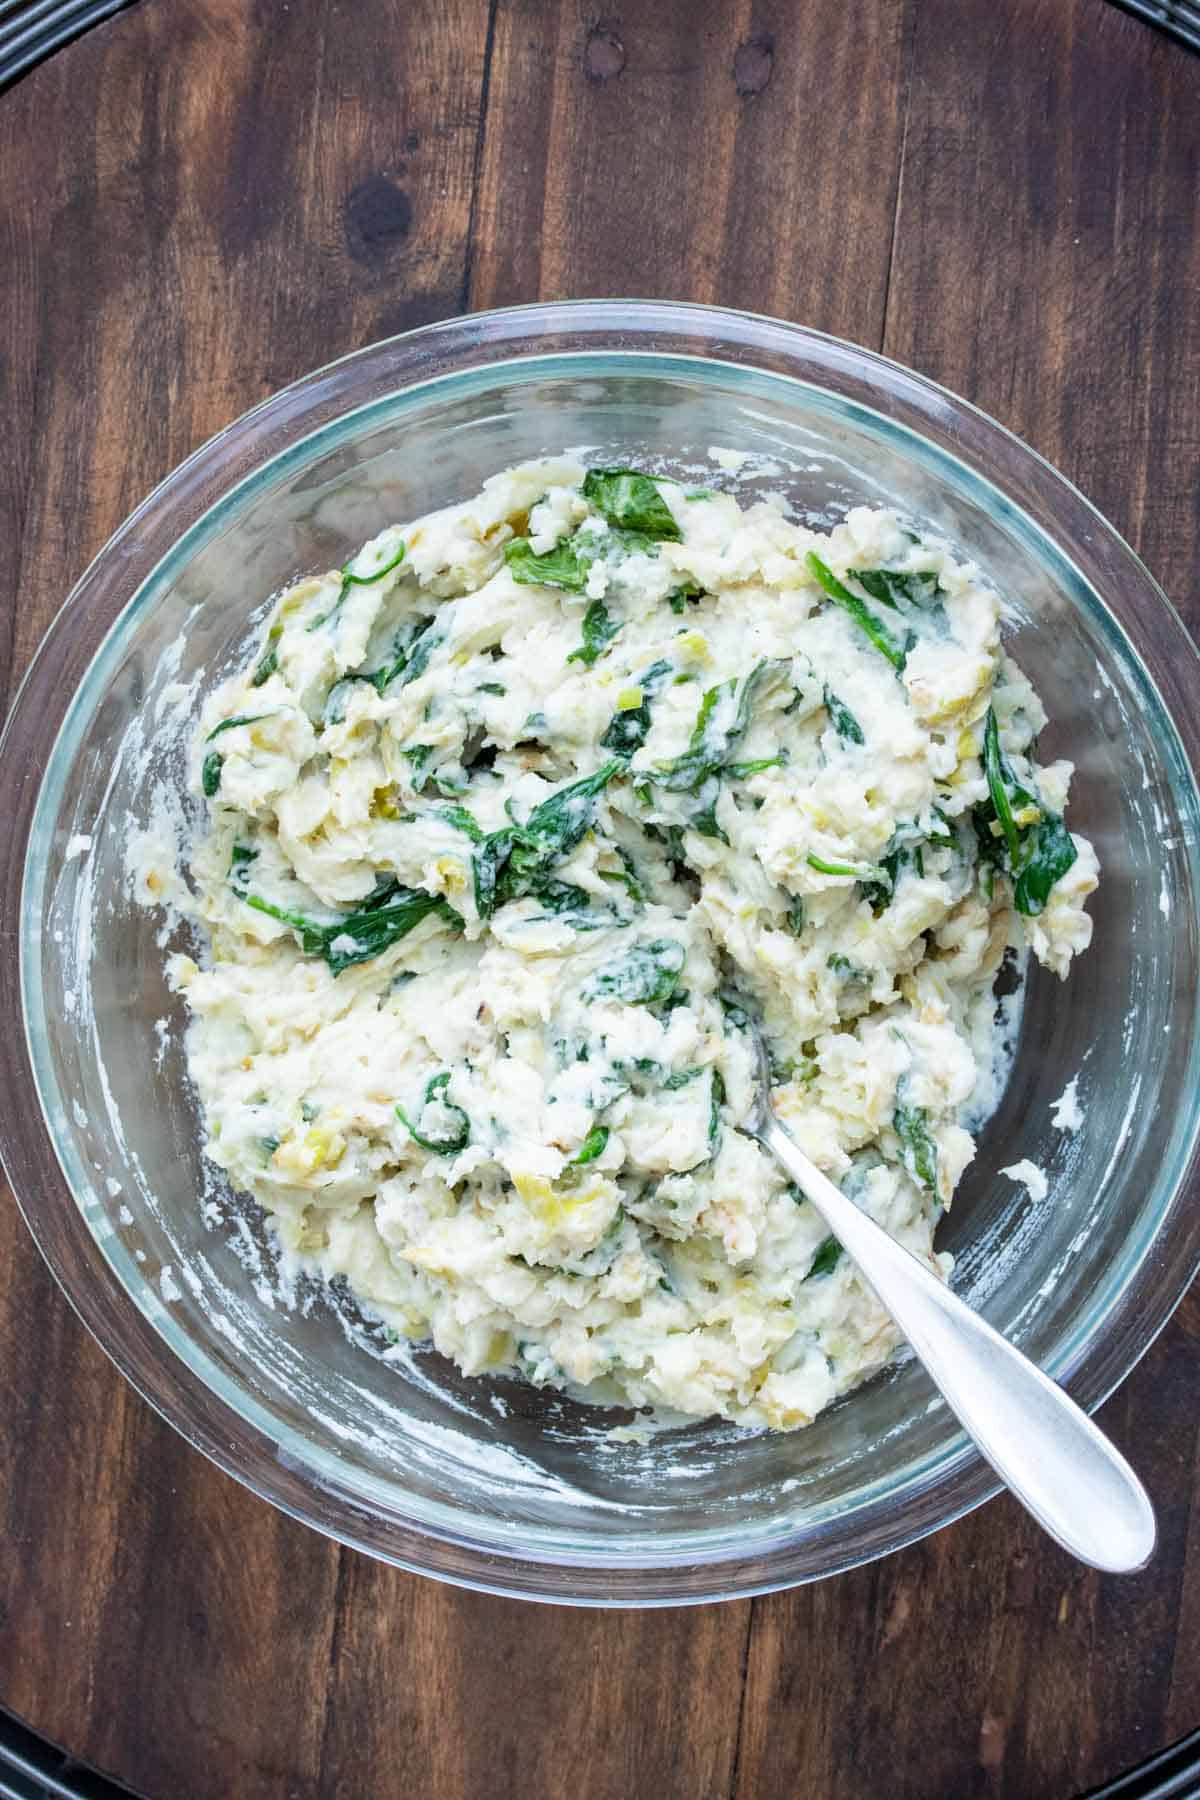 Glass bowl filled with mashed potatoes and sauteed greens mixed together.